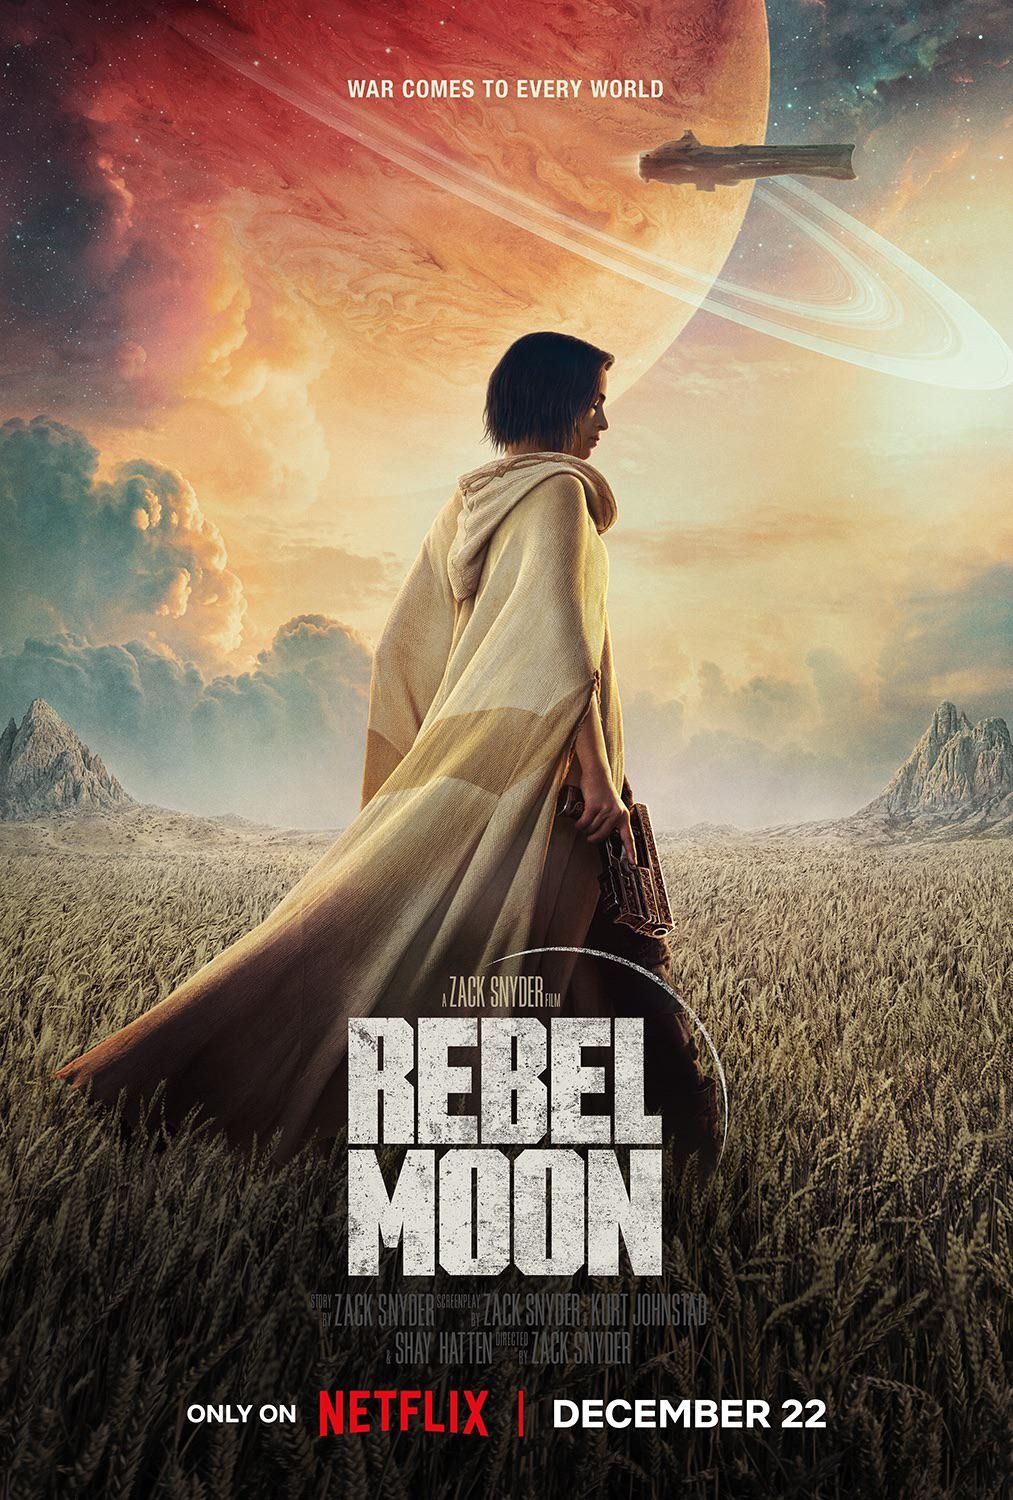 Rebel Moon review: Zack Snyder's new space opera is 'gushing Star